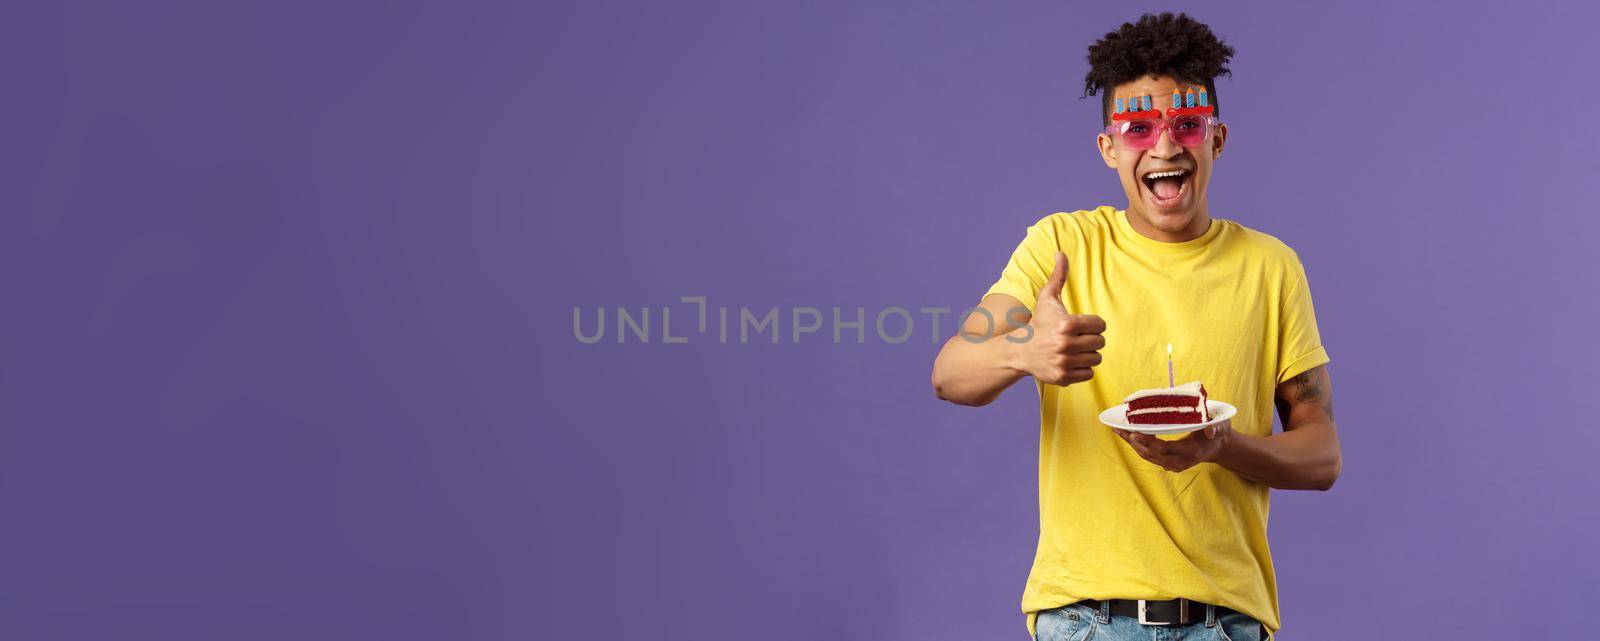 Celebration, party and holidays concept. Portrait of upbeat, cheerful young happy man celebrating birthday, wear funny sunglasses and hold b-day cake with lit candle, show thumb-up, recommend by Benzoix